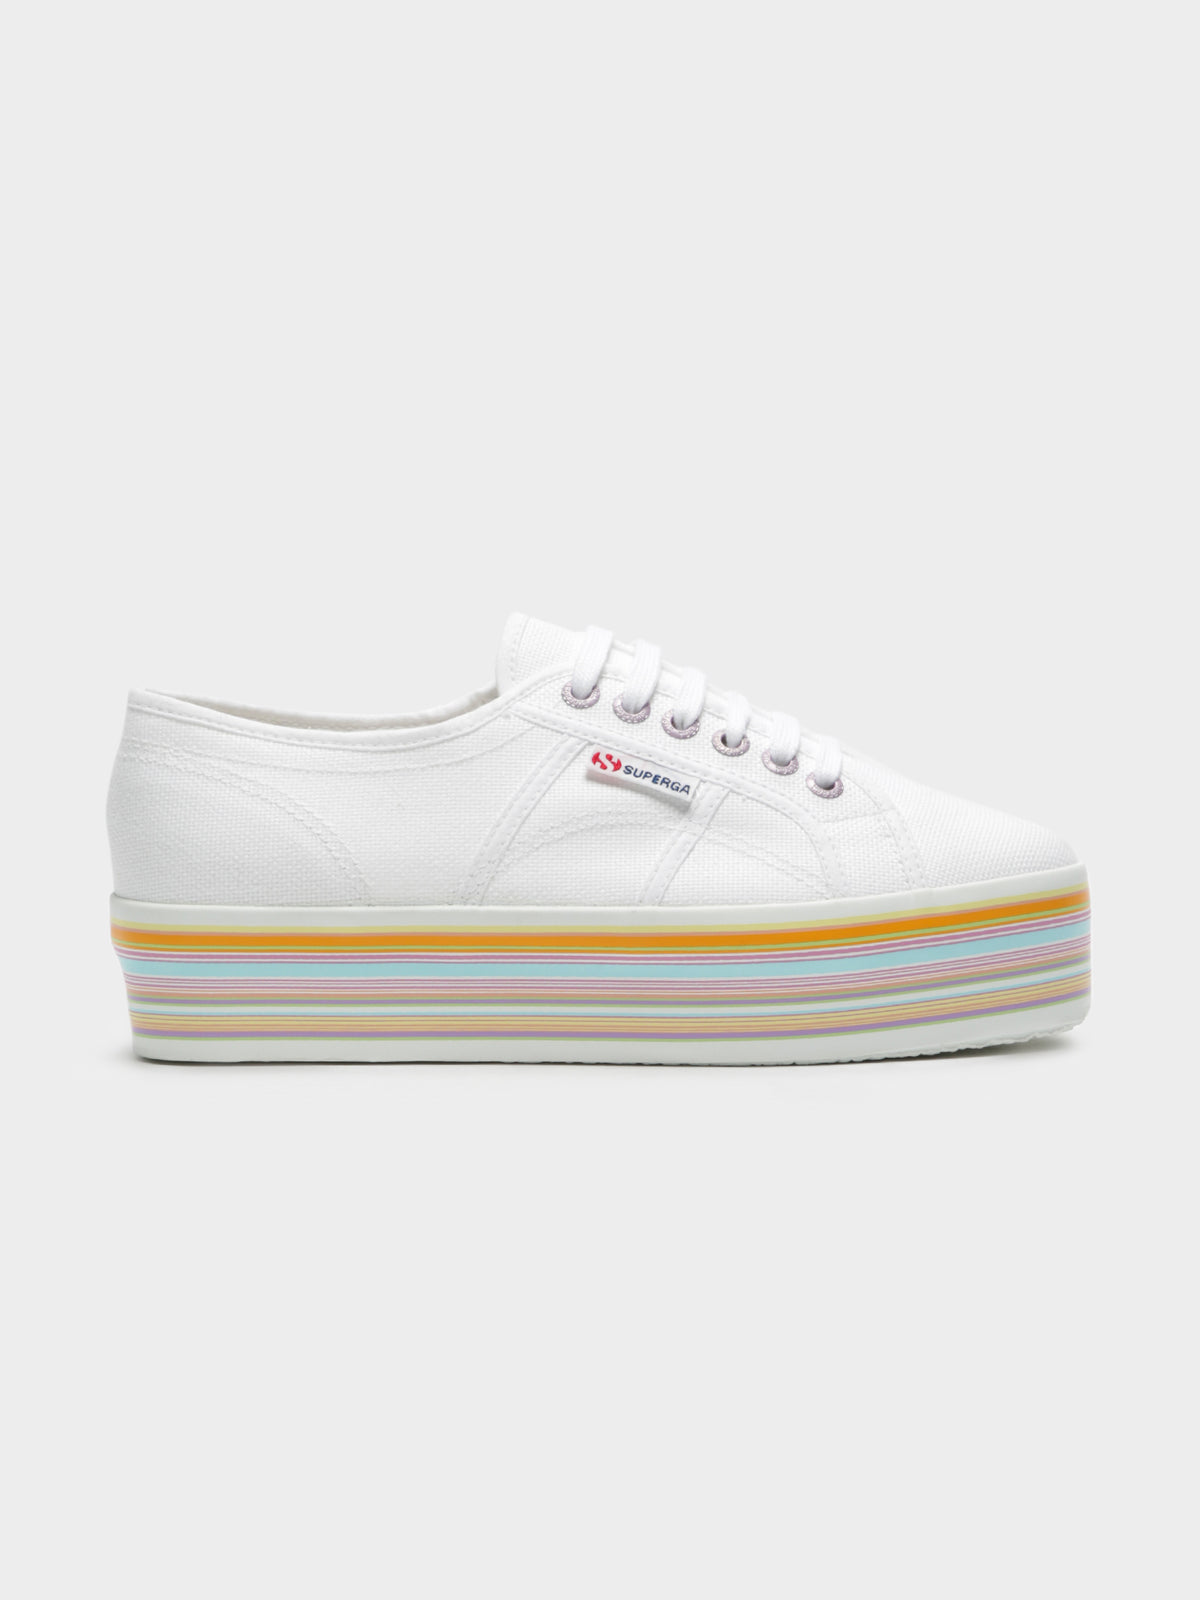 Womens 2790 Multicolor Sneakers in White